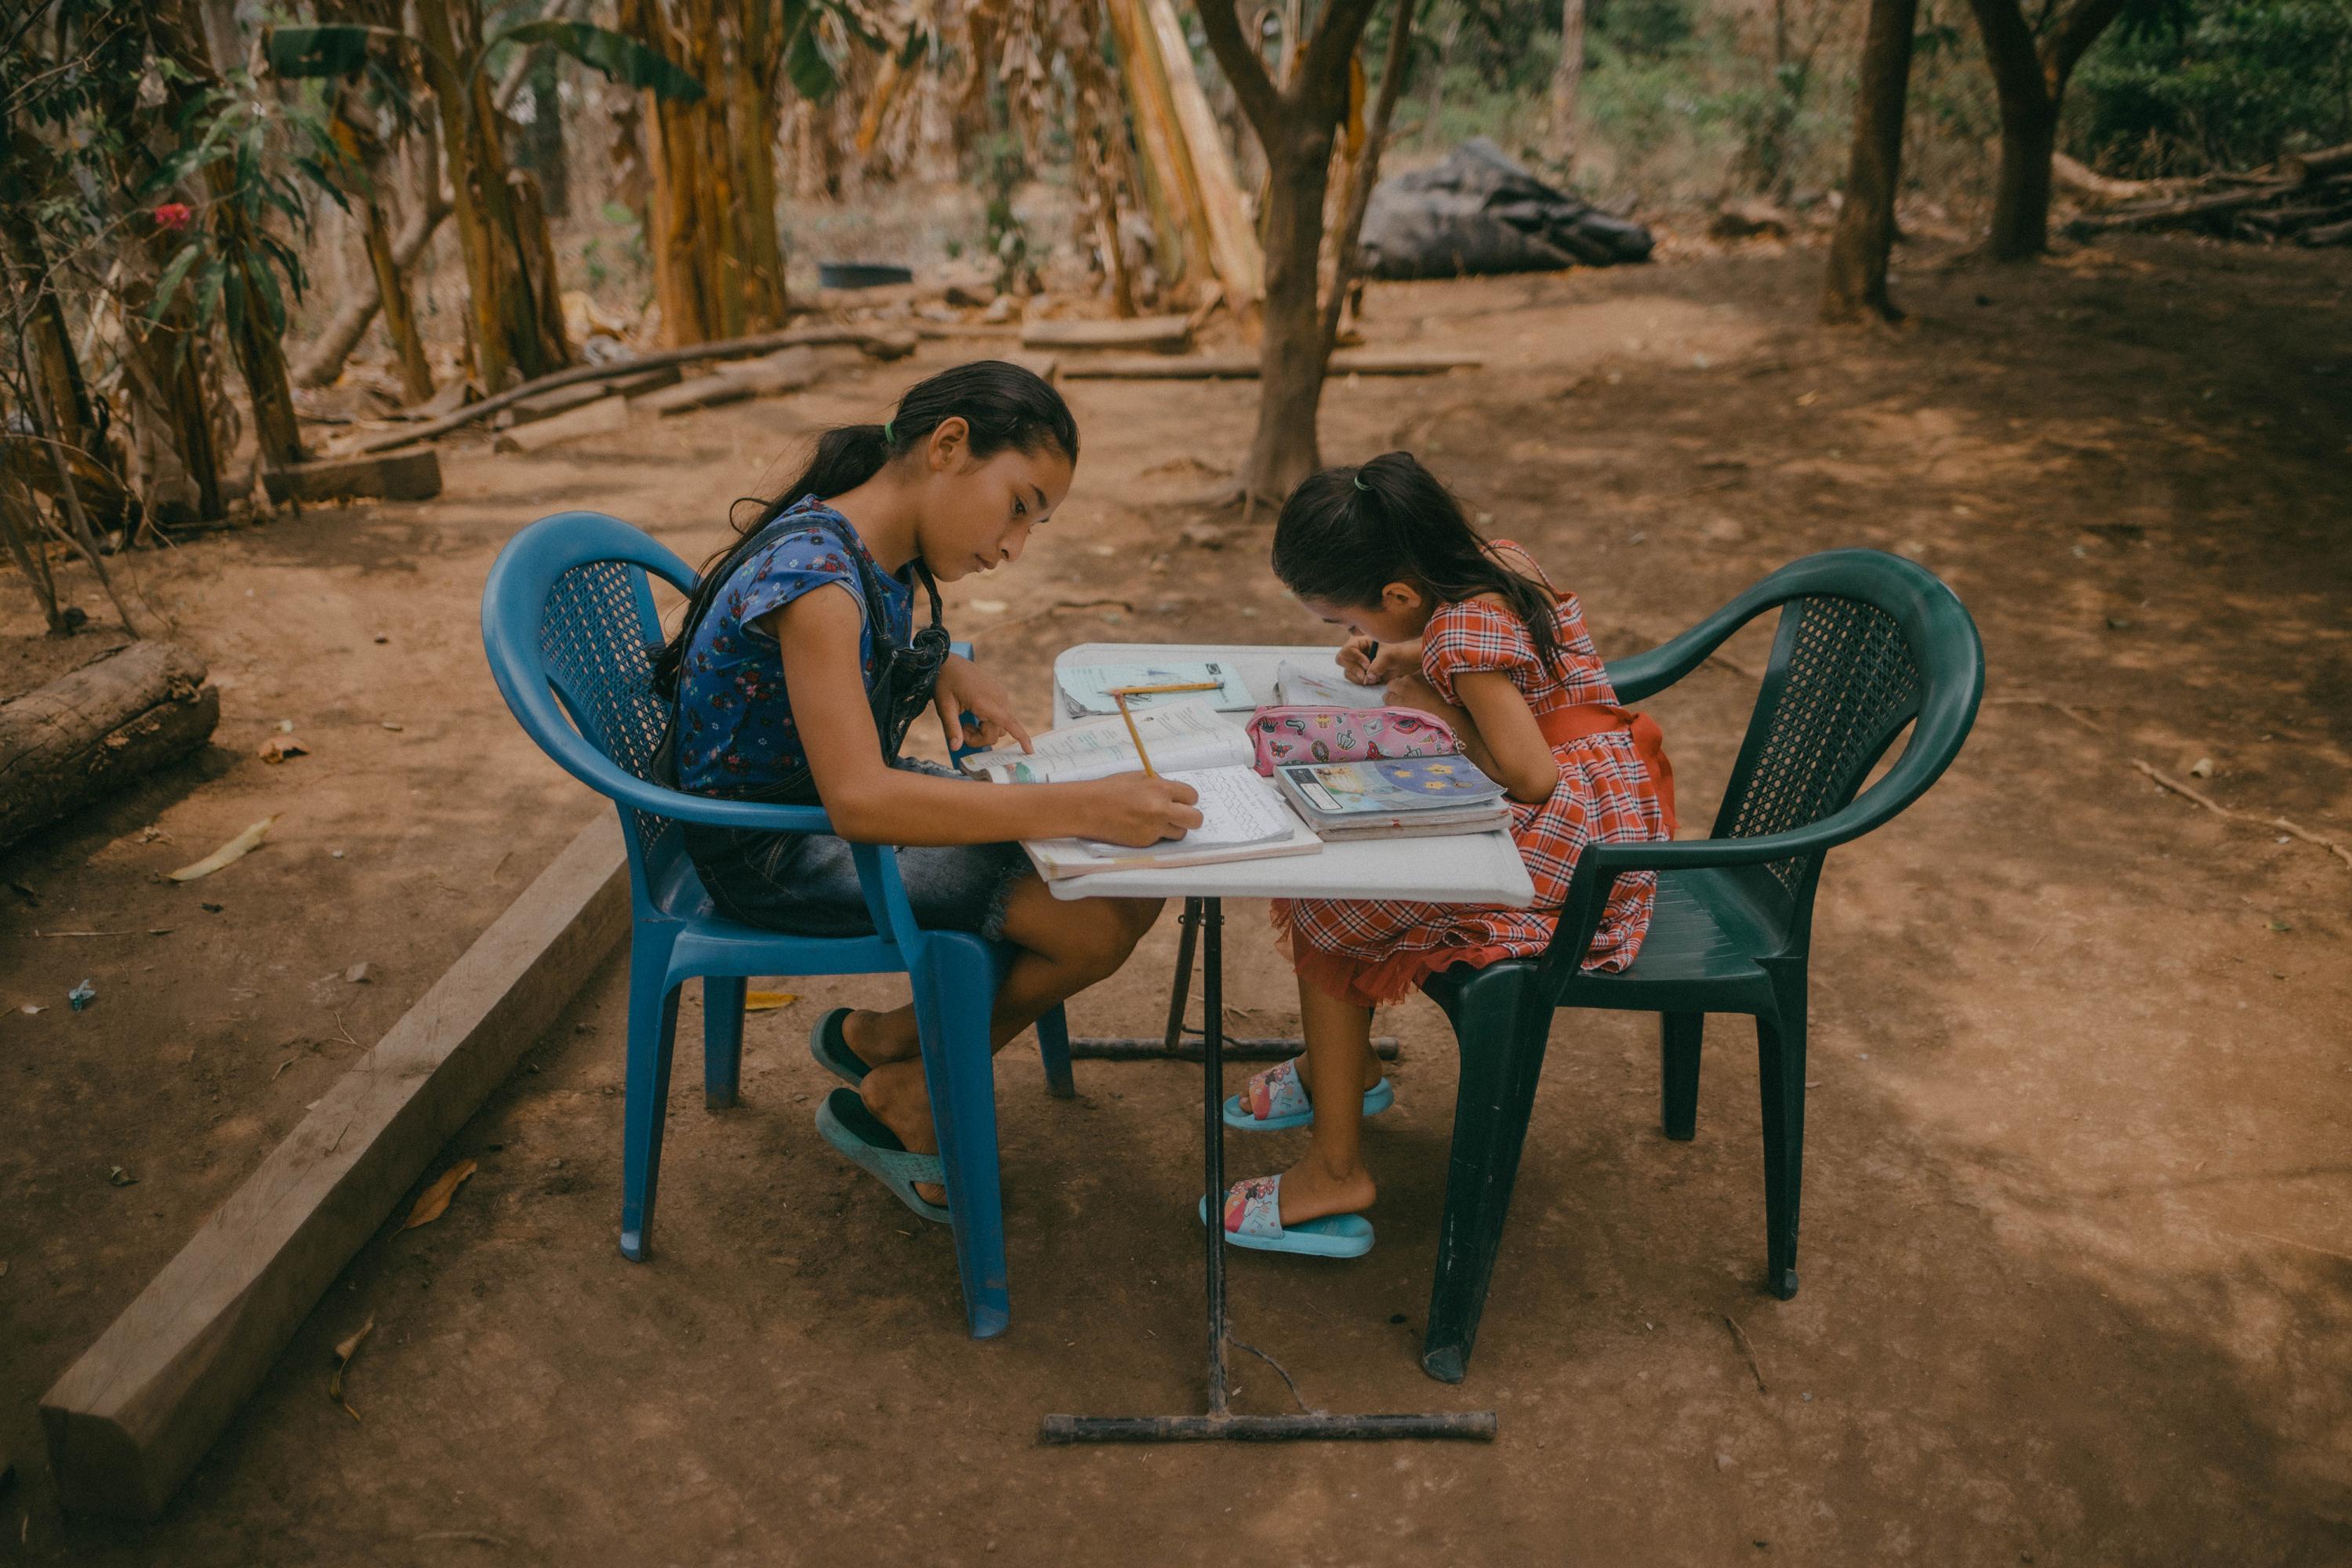 Kennedy, 11, and Odalis Asegurado, 6, live in the community of Monseñor Romero, in the canton of Corozalito, Berlín. Their father, José, is able to provide only two meals a day for his daughters, but they eat breakfast at the local school. “The situation is really hard here, we have no work, there’s no water, and we have nothing to grow,” he says. “The animals are only good for hauling firewood, they don’t provide us with milk or meat. We eat tortillas with something, like rice or corn, but we don’t eat chicken or other meat.”